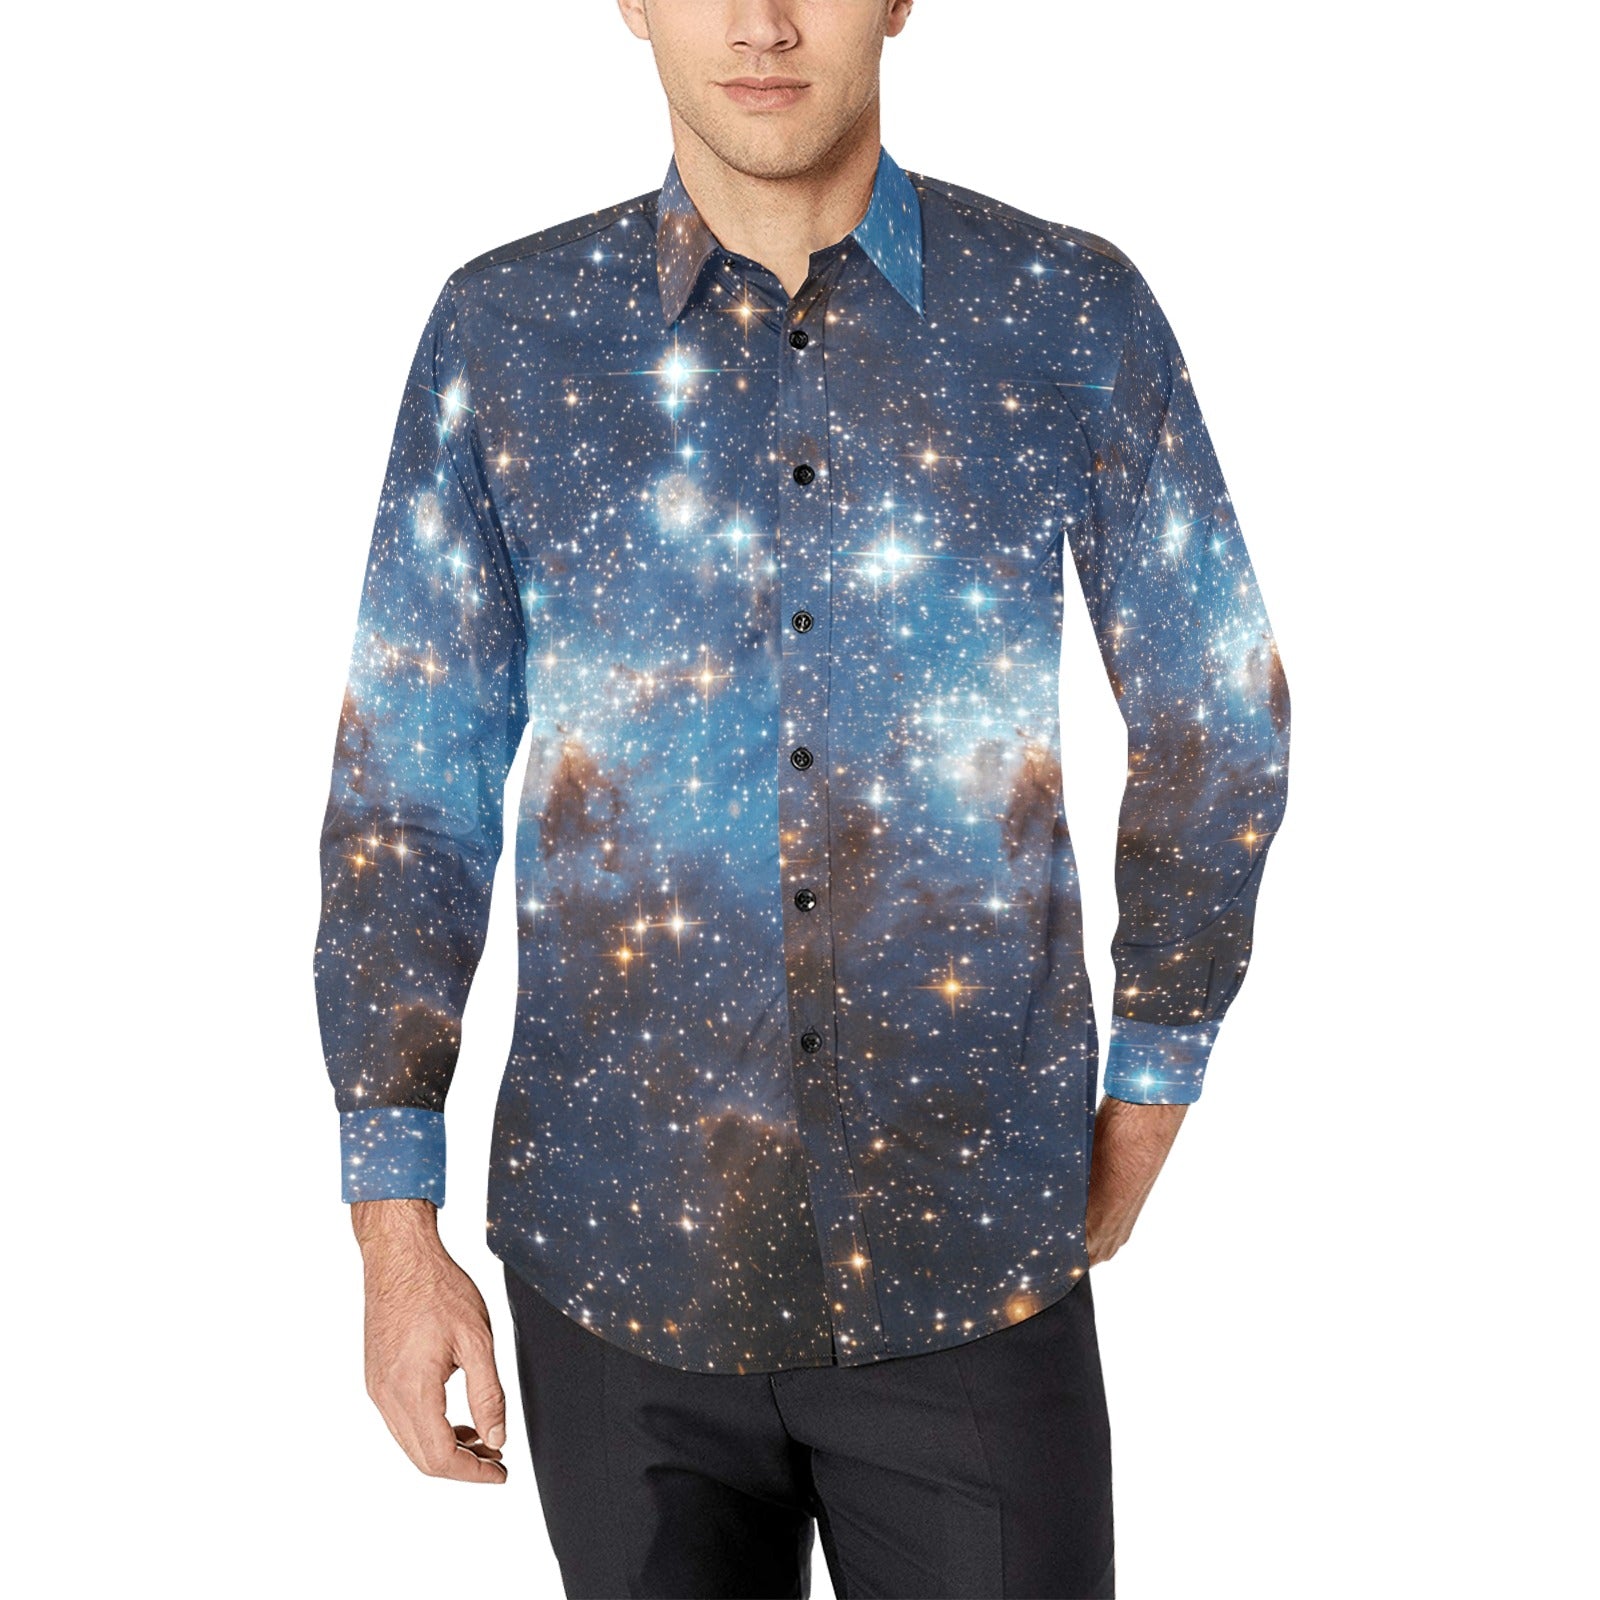 Starcove Galaxy Long Sleeve Men Button Up Shirt, Space Themed Stars Universe Cosmos Print Unique Buttoned Collar Dress Shirt with Chest Pocket L